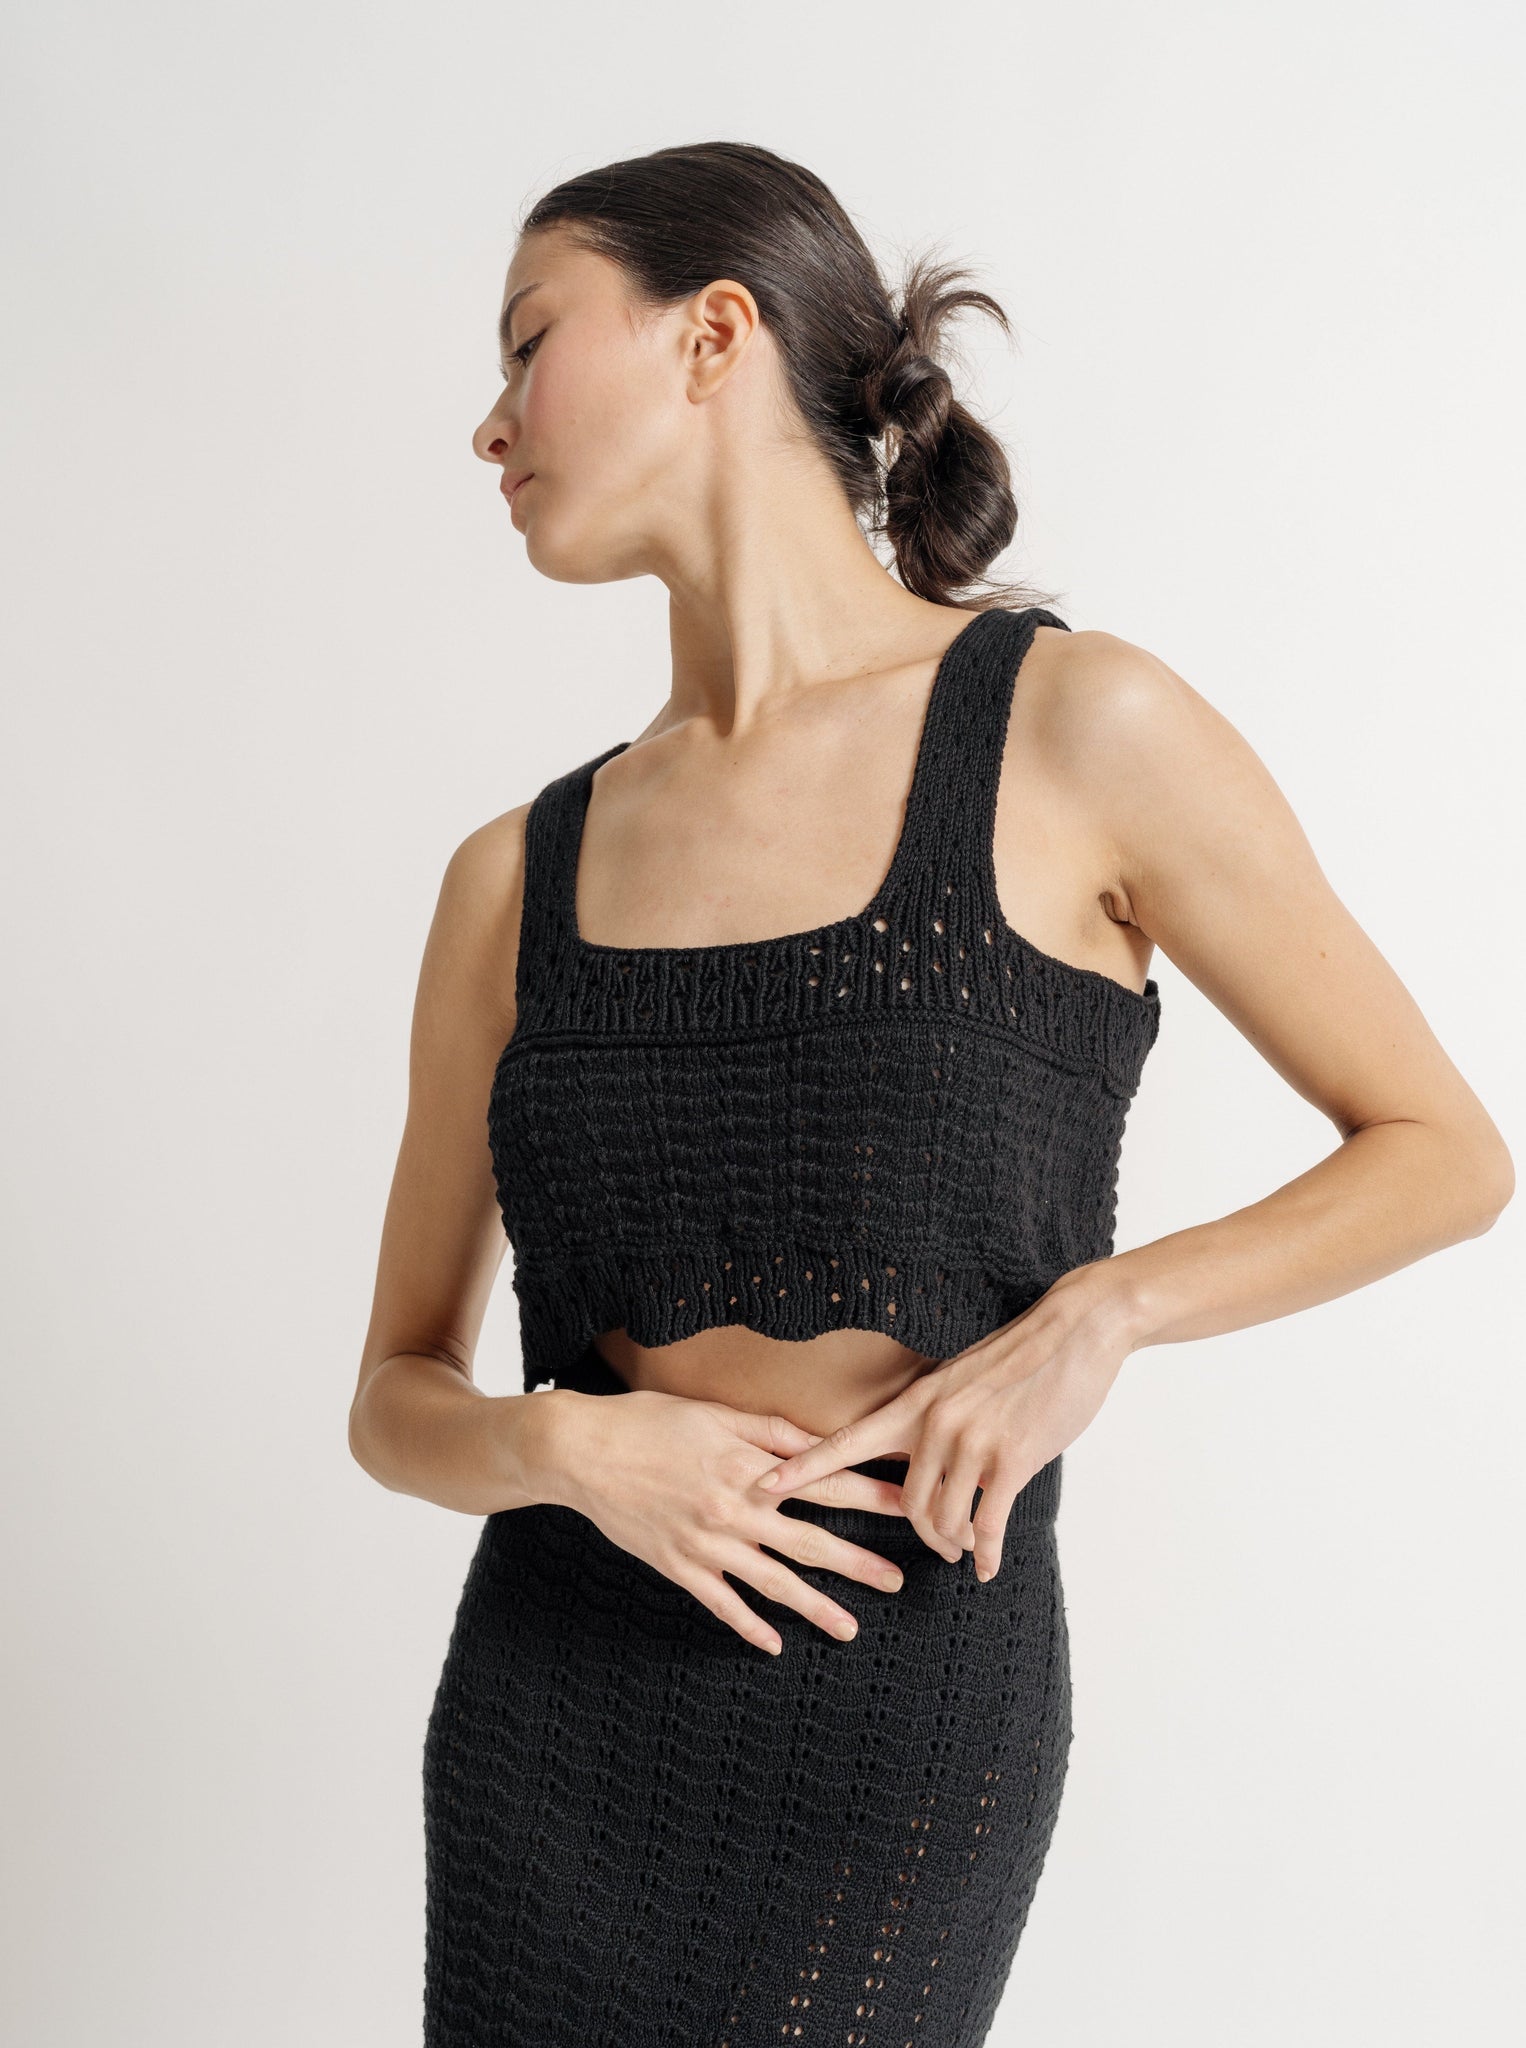 A woman posing in a Lyric Crochet Crop Tank - Black with her hands on her waist, looking to the side against a neutral background.